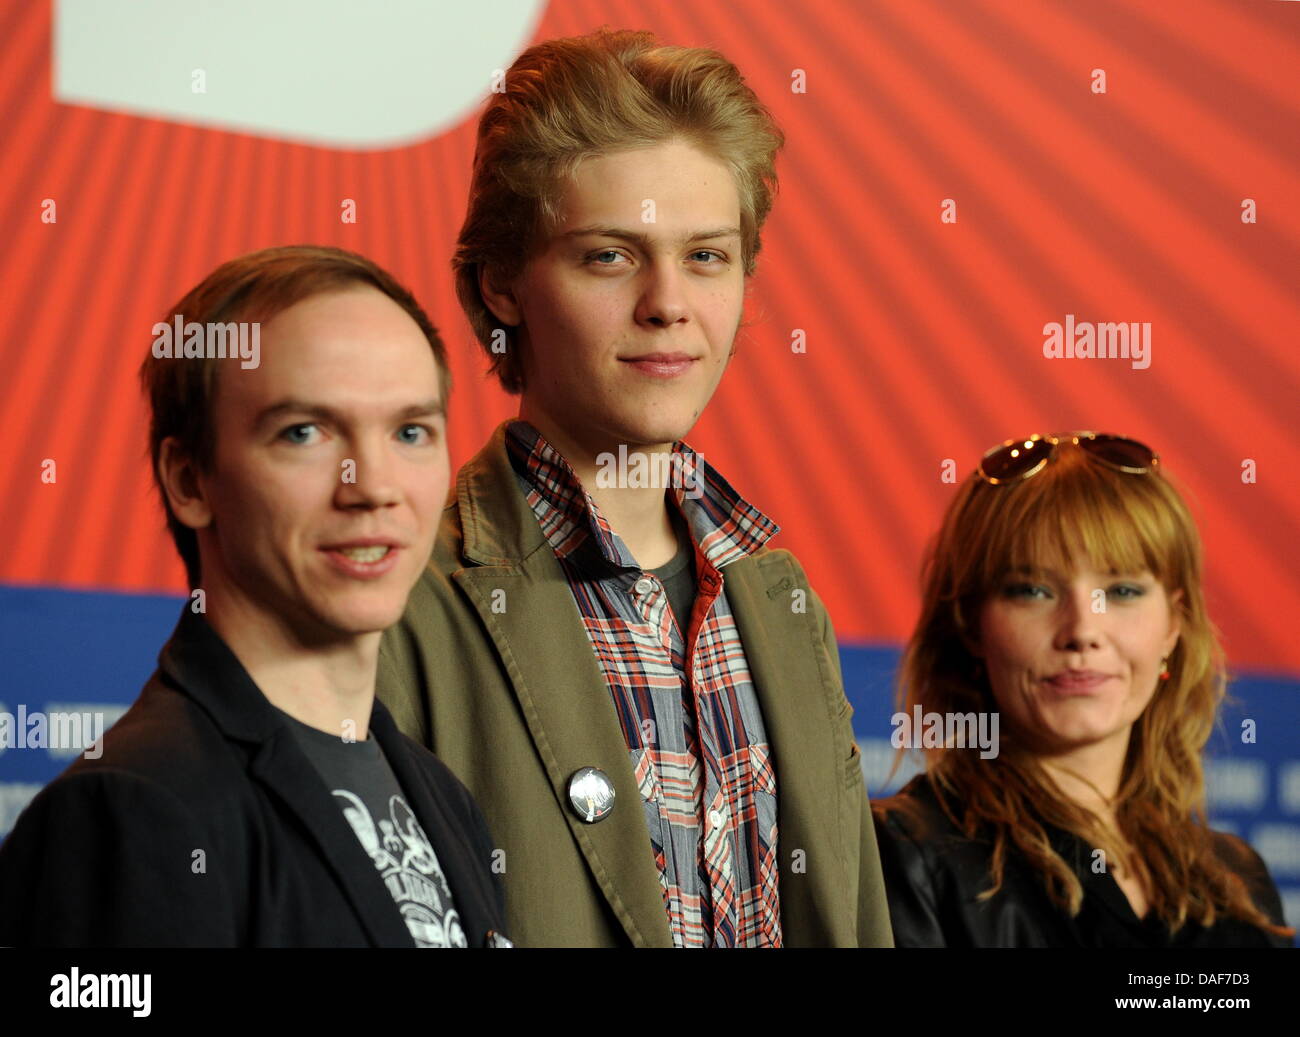 Polish director Jan Komasa (L-R), director of photography Radoslaw Ladczuk and Polish actress Roma Gasiorowska pose during the press conference for the film 'Suicide Room' ('Sala Samobojcow') during the 61st Berlin International Film Festival in Berlin, Germany, 12 February 2011. The film is running in the section Panorama Special of the International Film Festival. The 61st Berlin Stock Photo